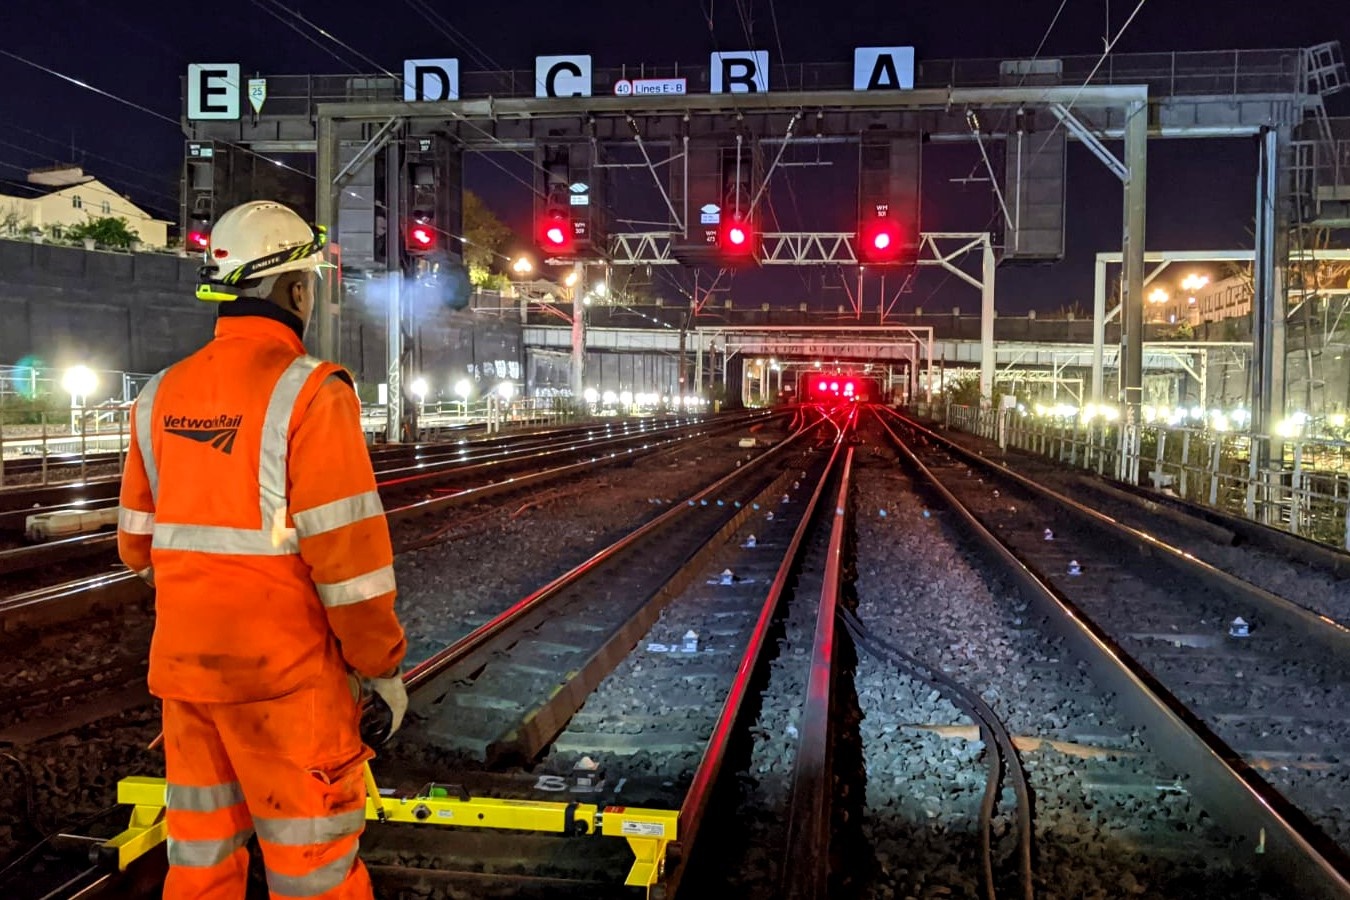 Overnight work to overhead power lines at Euston  